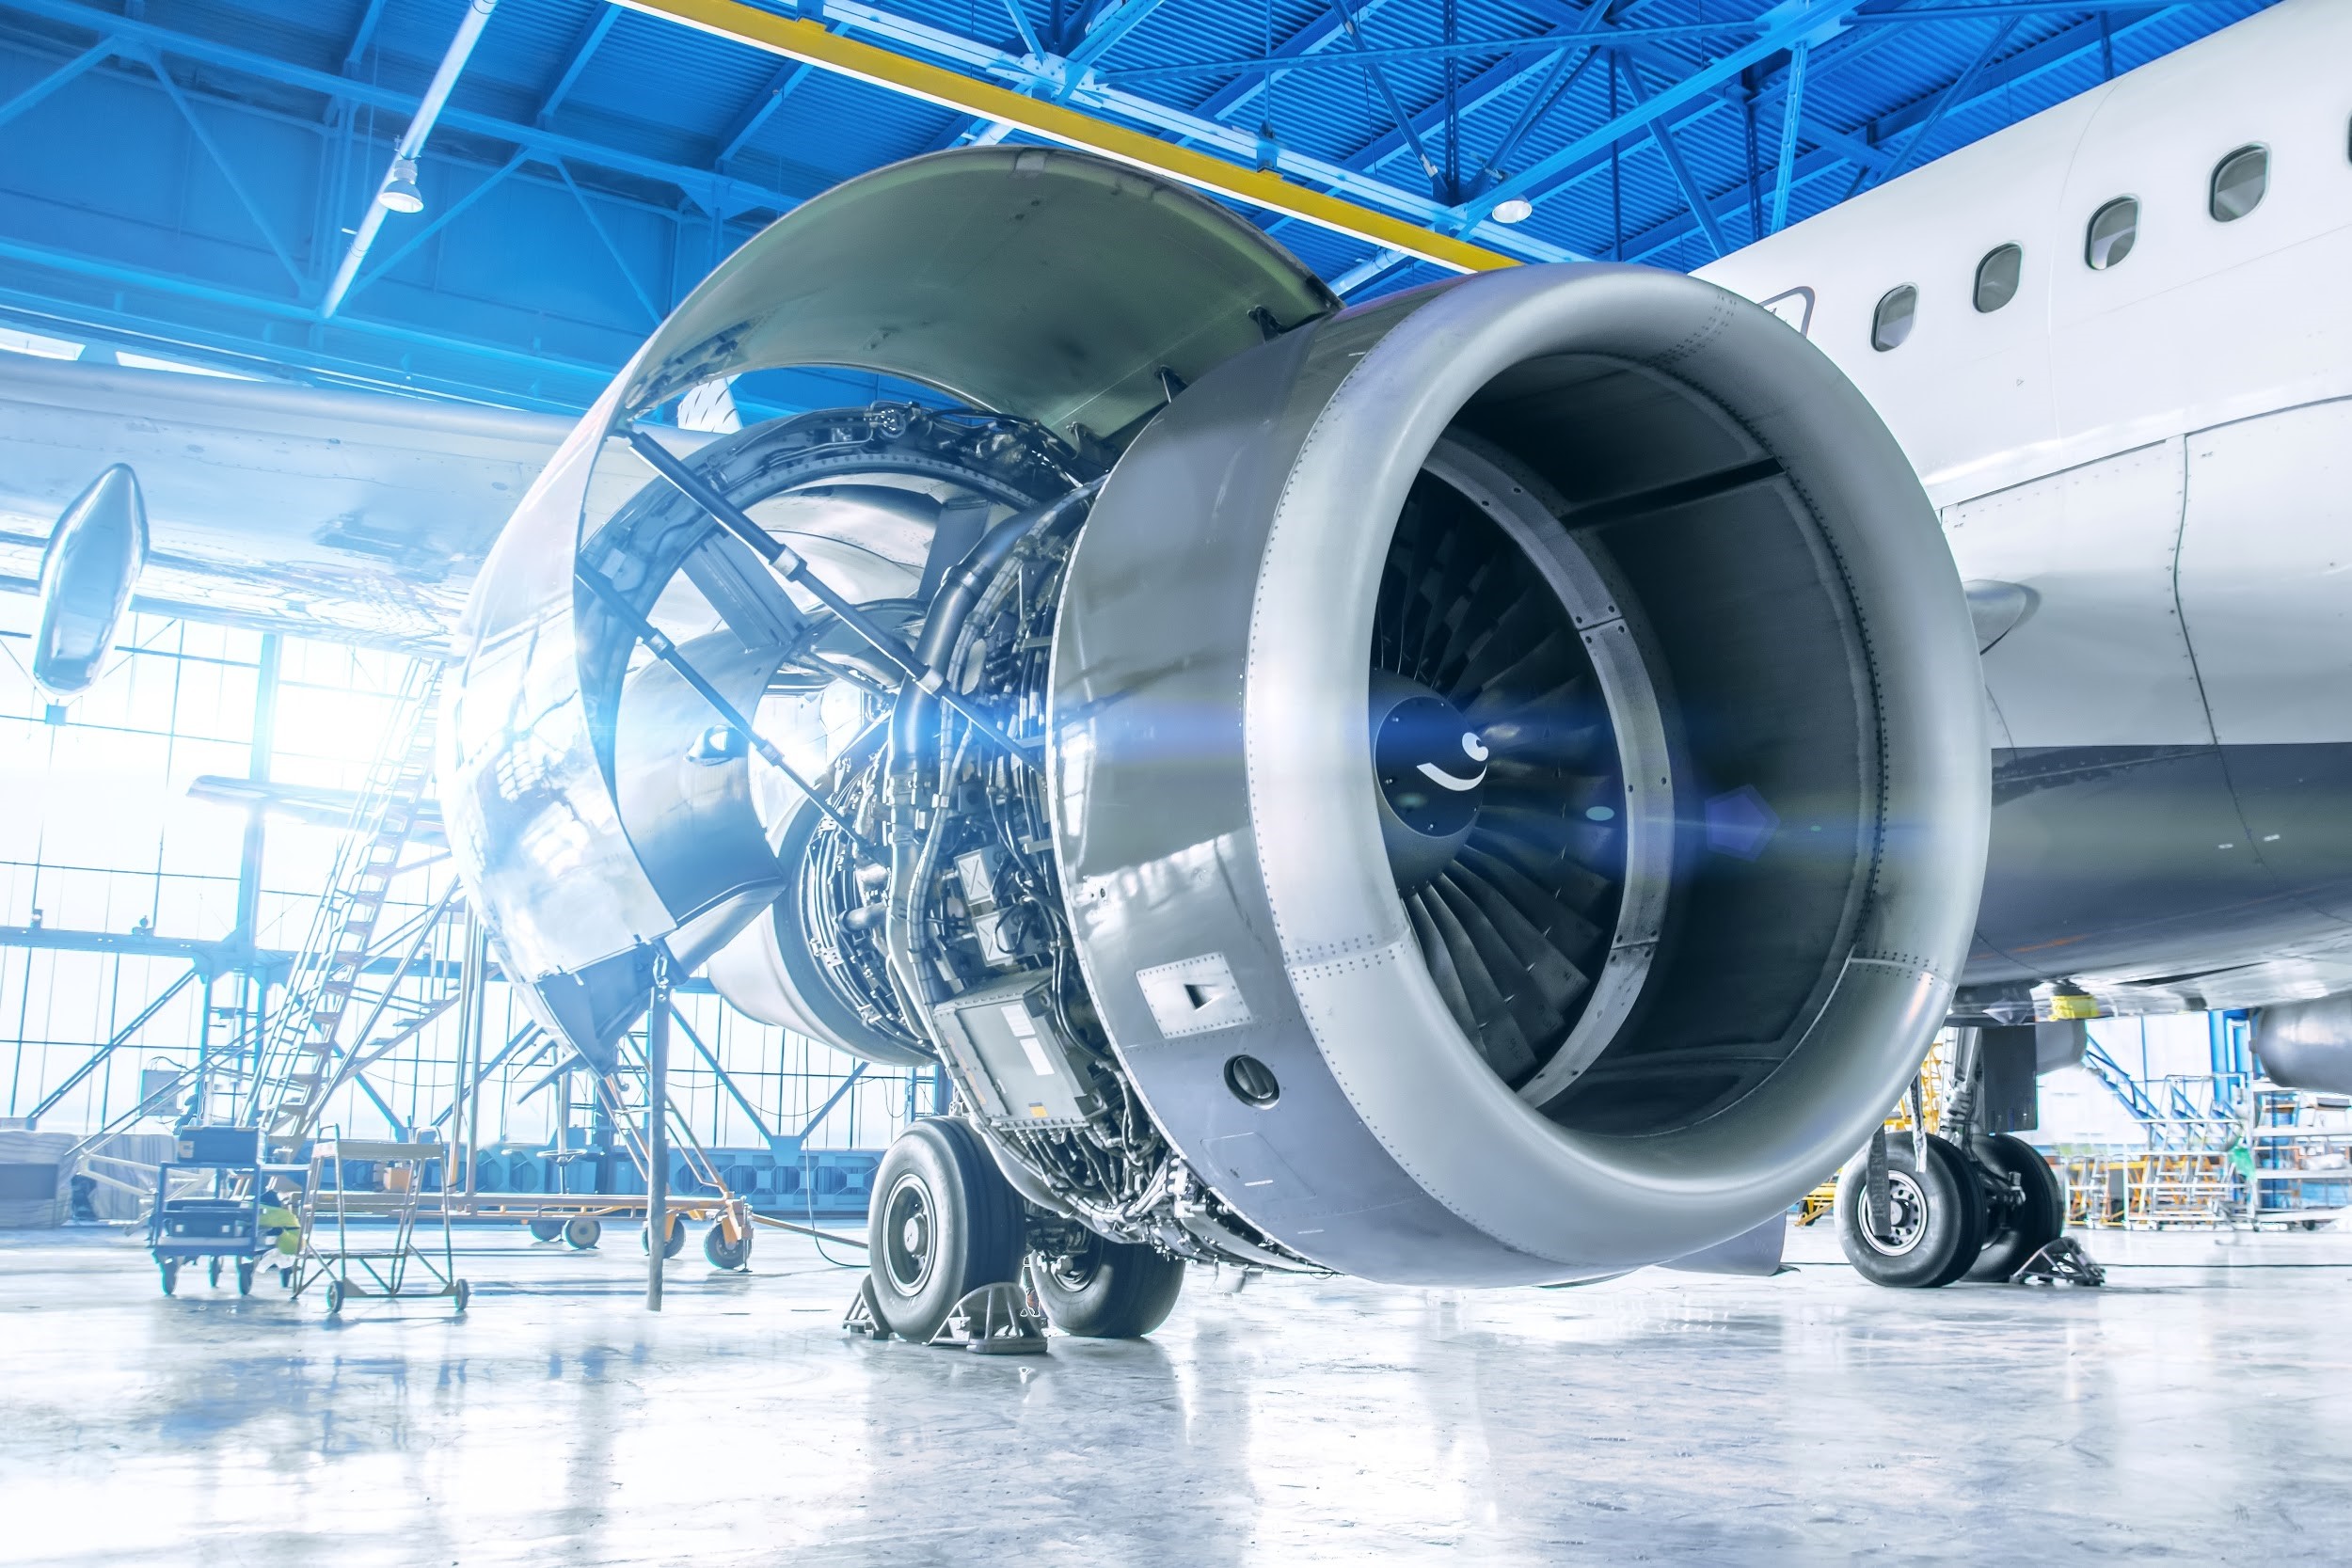 Optomec's DED technology has often been used for aerospace MRO purposes in the past, and its new HC-TBR machine could be used within similar applications. Photo via Optimec.